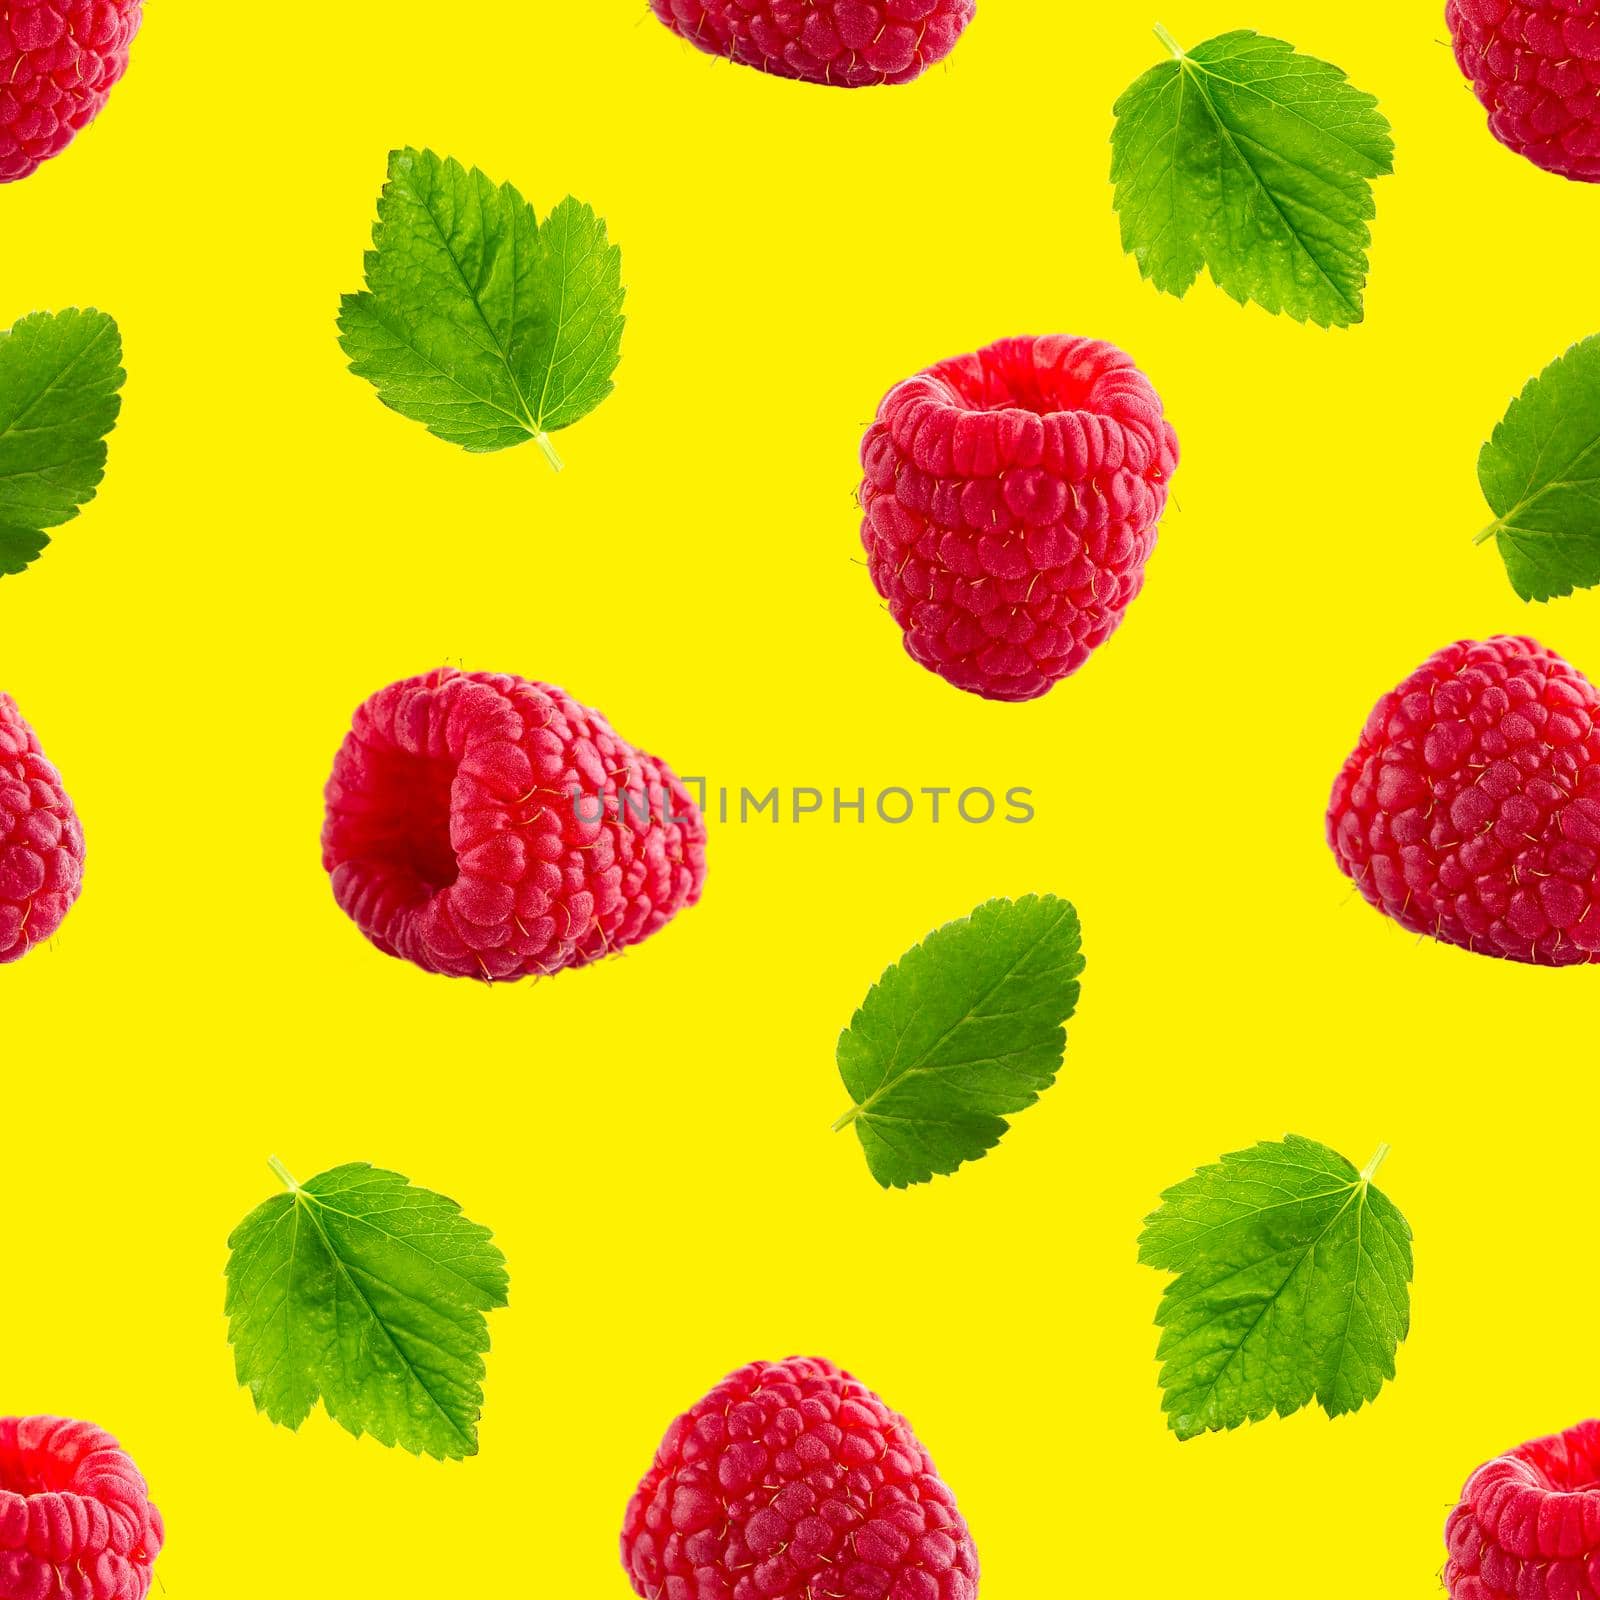 Seamless pattern with ripe raspberry. Berries abstract background. Raspberry pattern for package design with yellow background.